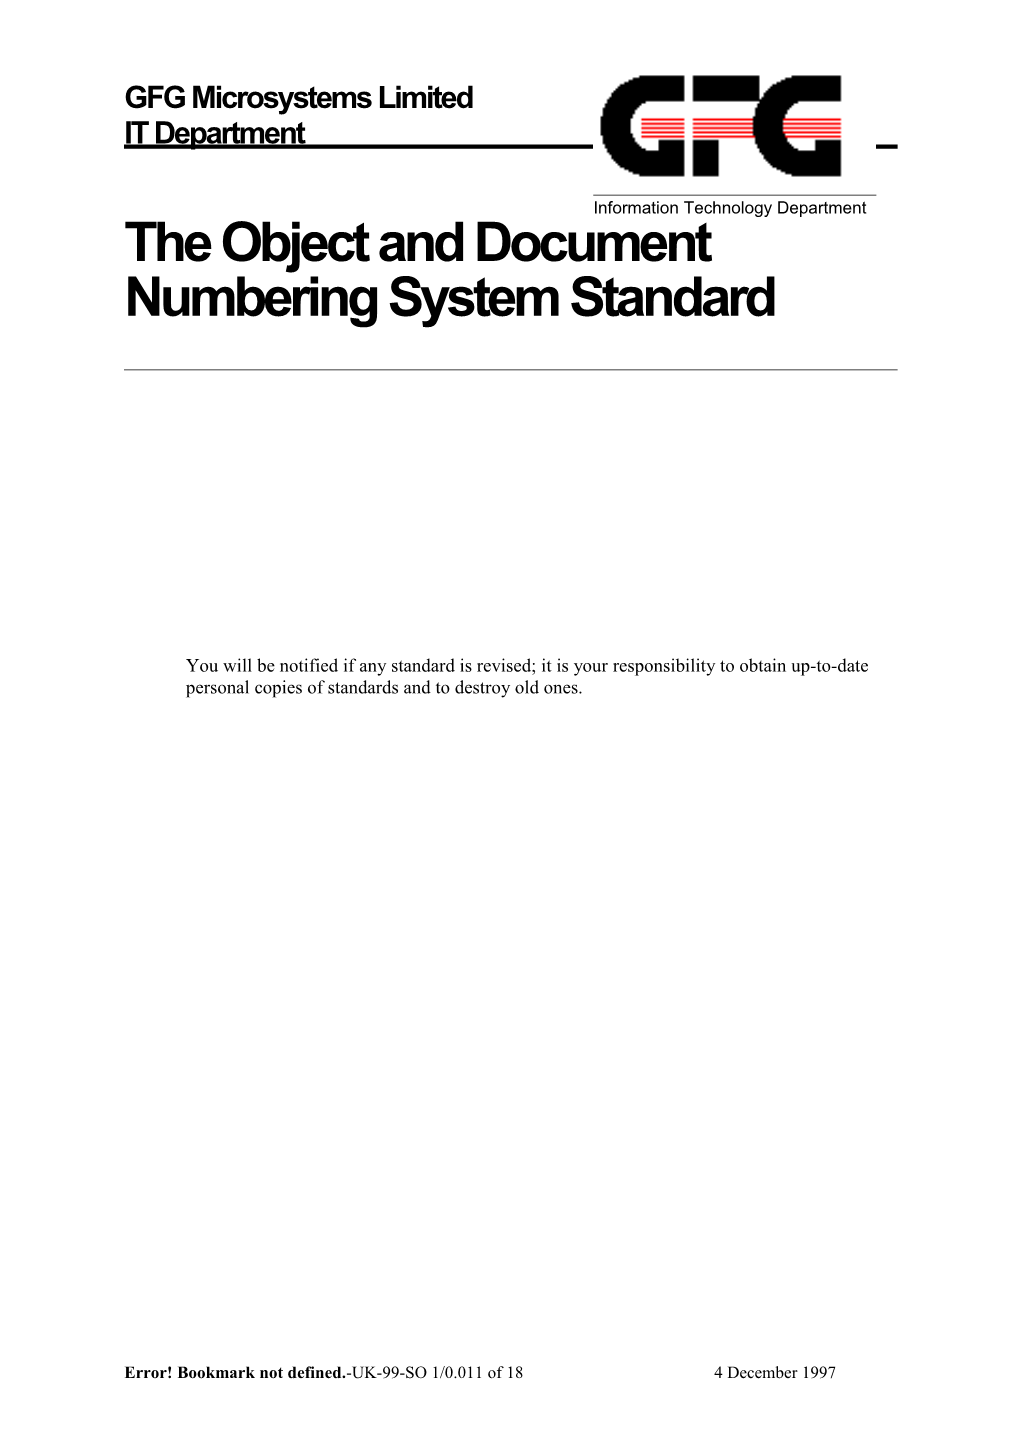 The Object and Document Numbering System Standard